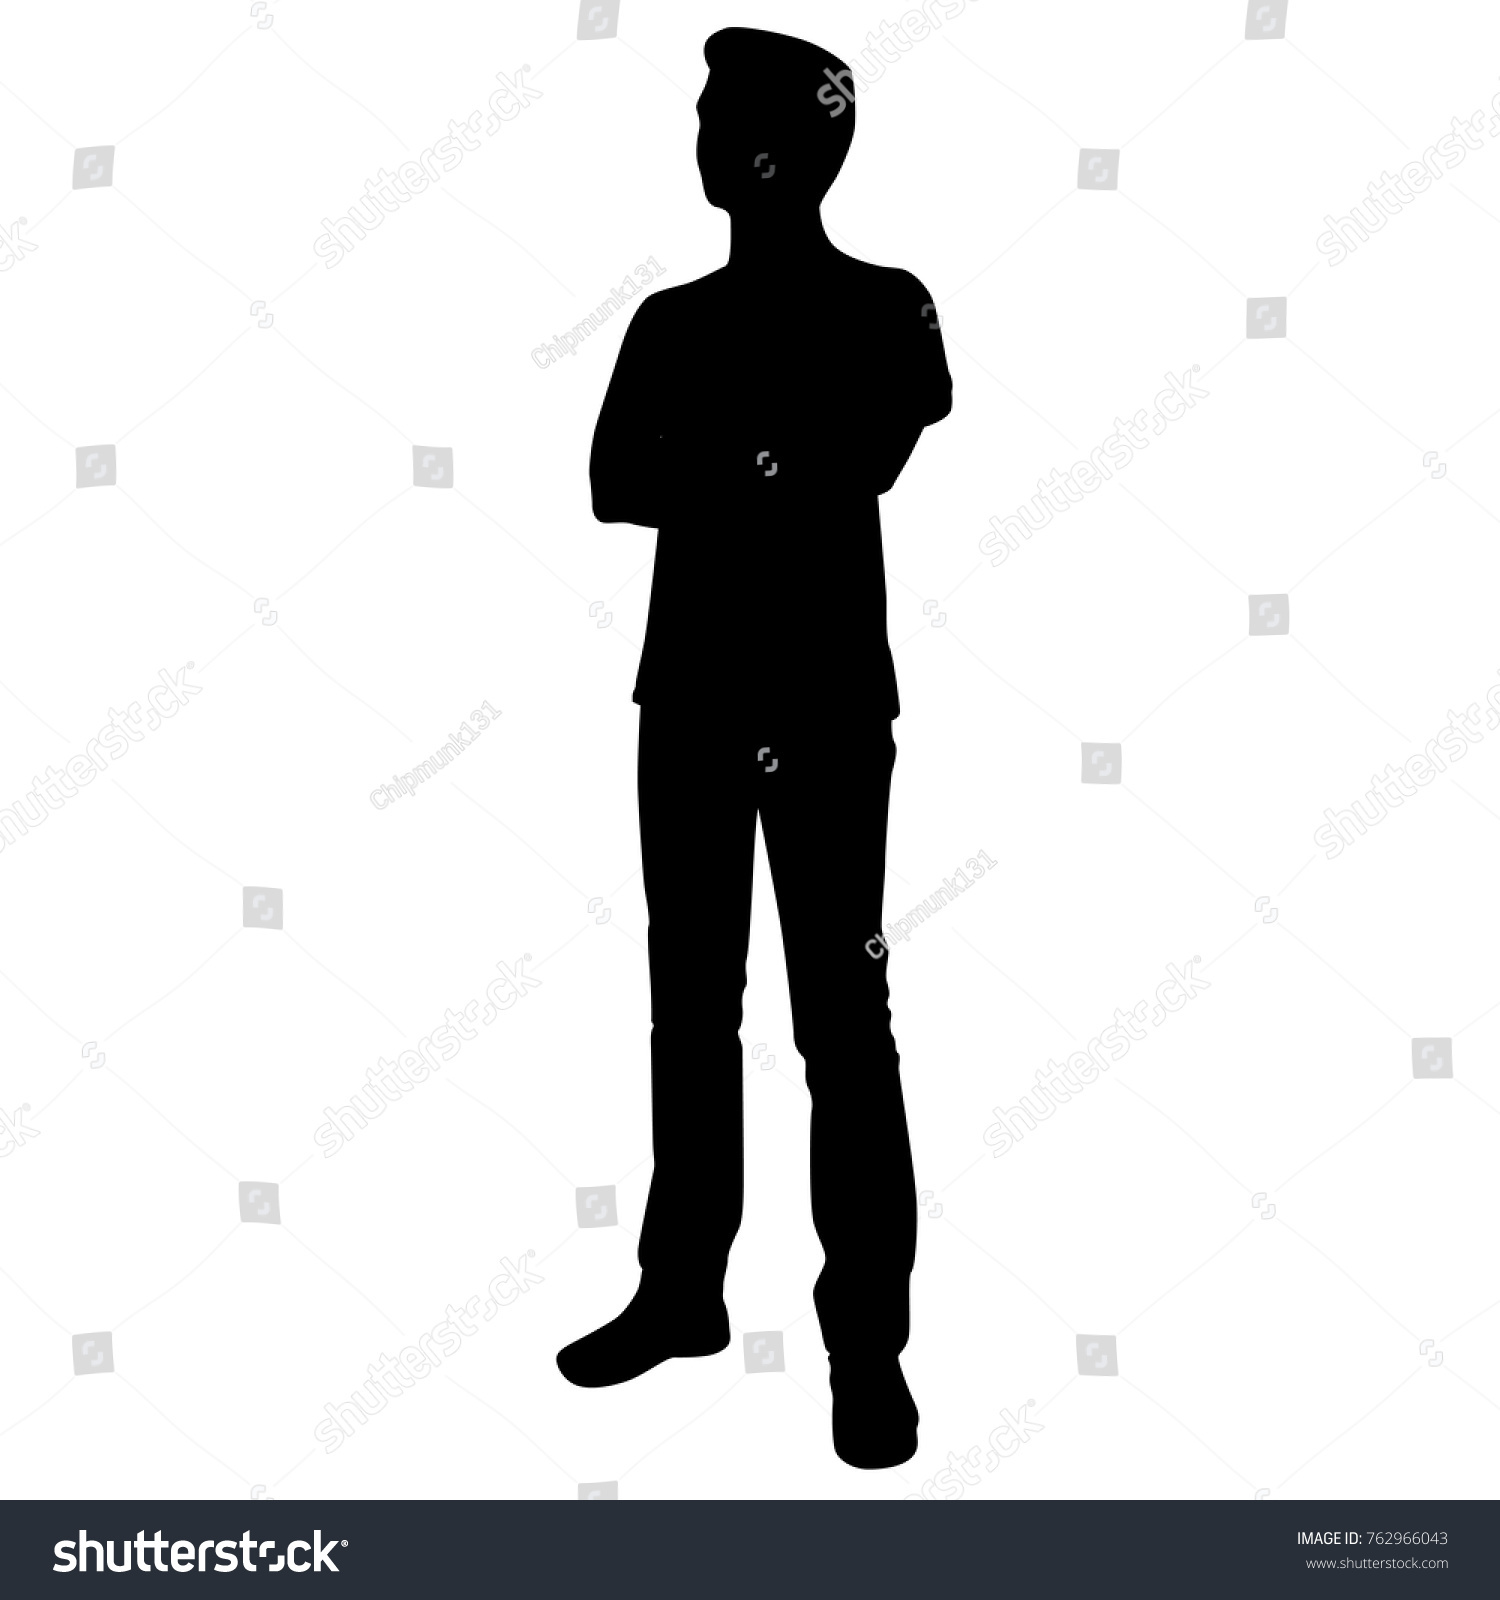 Vector Silhouette Man Standing People Black Stock Photo (Photo ...